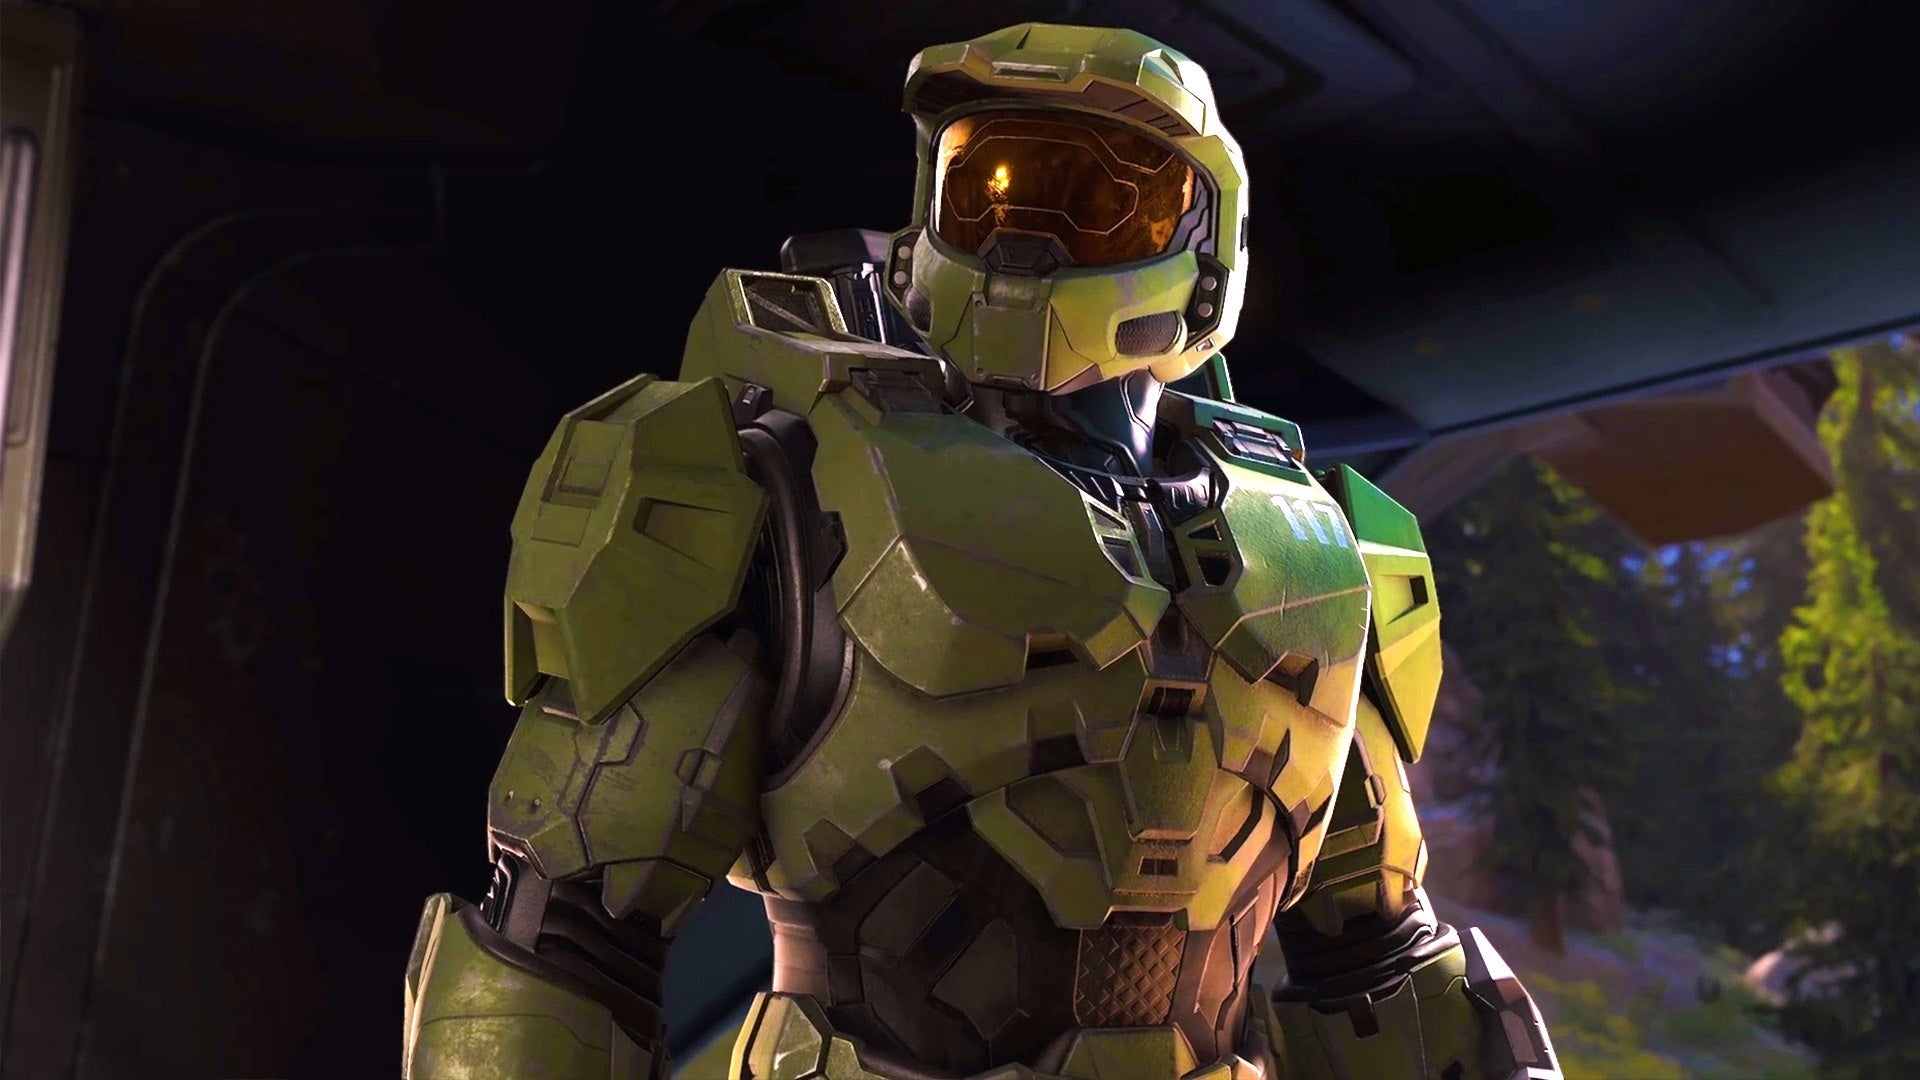 Next Halo Game In Development, Reports Claim - Insider Gaming